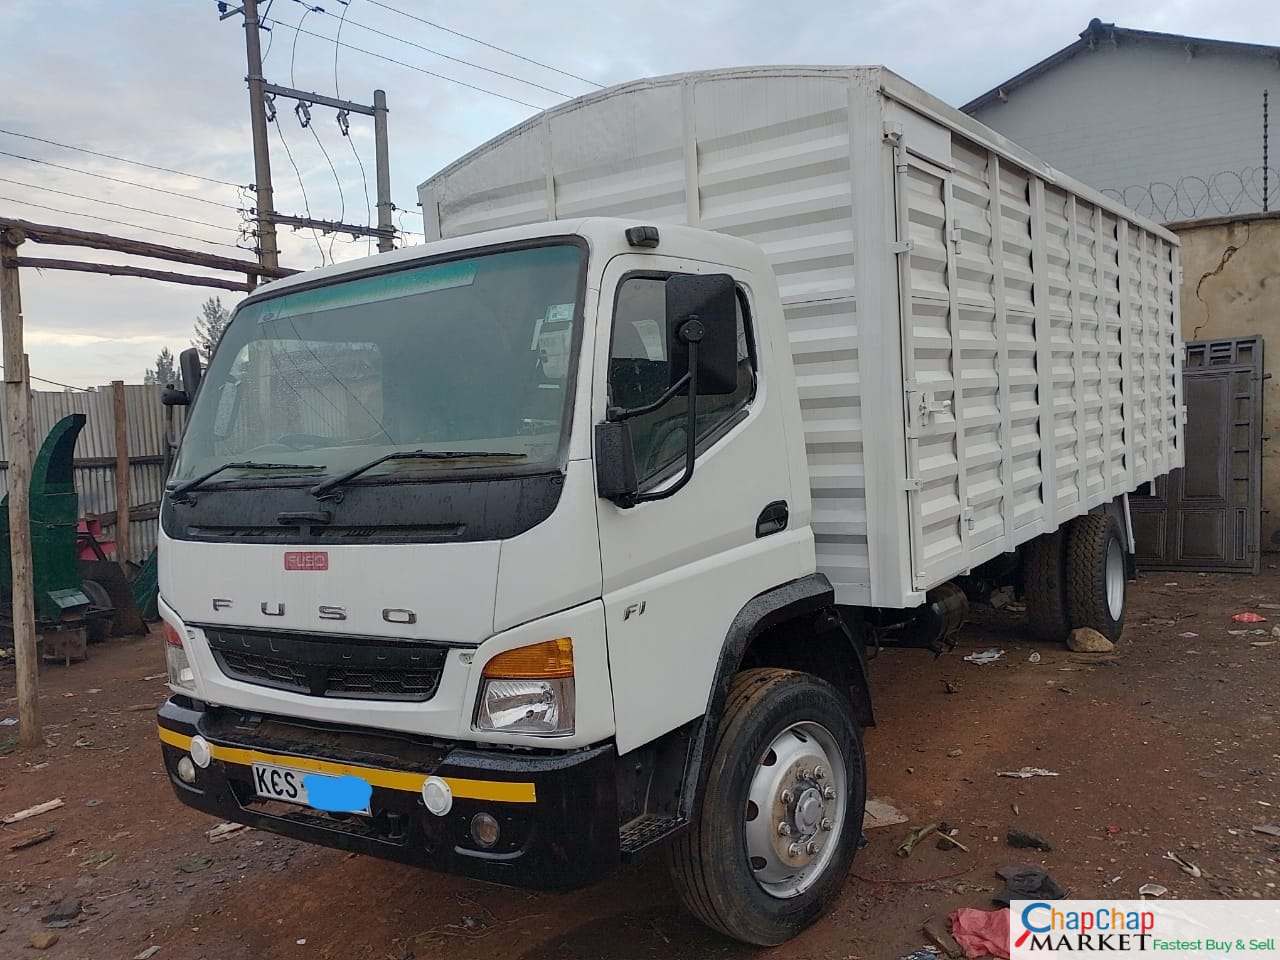 Cars Cars For Sale-Mitsubishi Fuso Kenya LOCAL QUICK SALE You Pay 40% Deposit Trade In OK fuso for sale in kenya 7